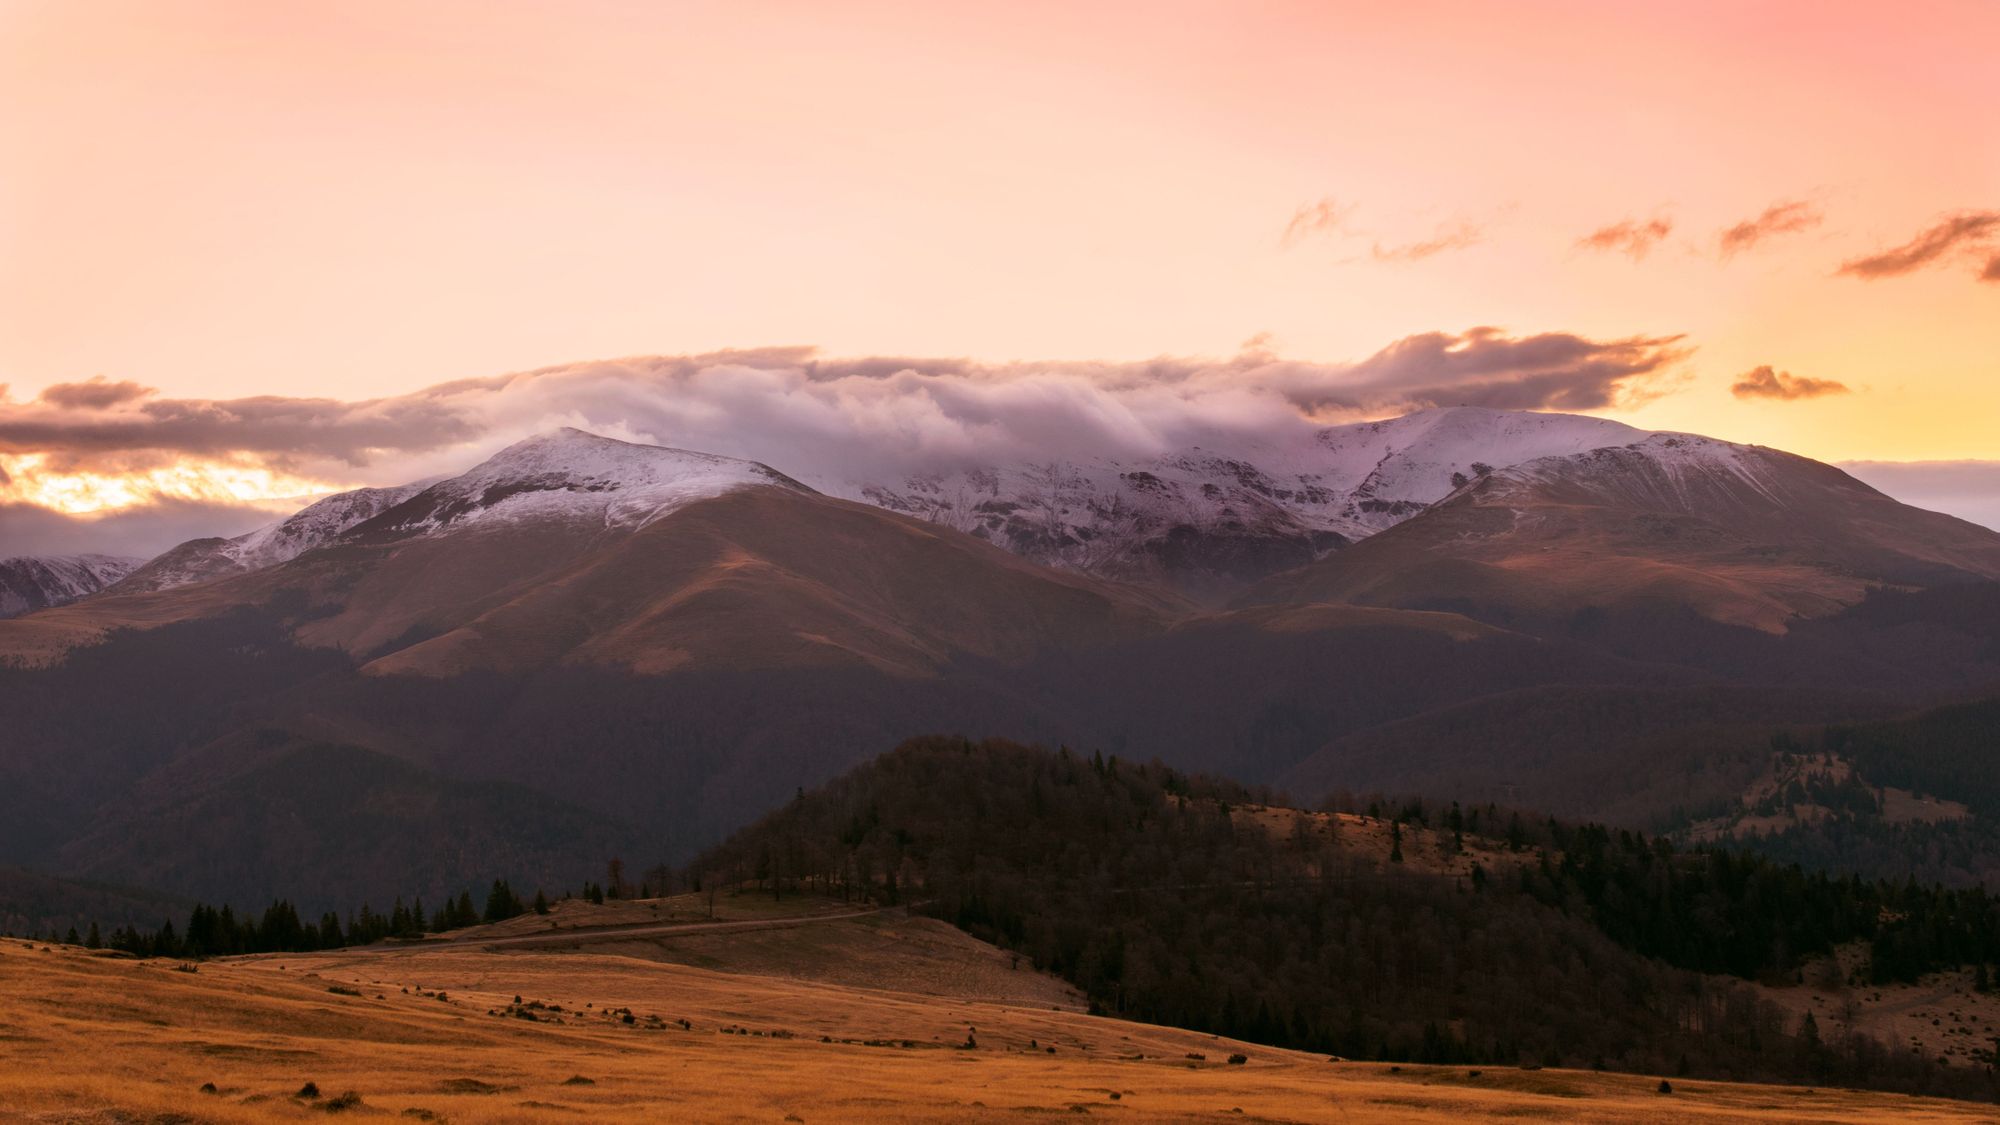 The stunning Tarcu mountains in Romania, where bison, wolves and bears still roam. Photo: Getty